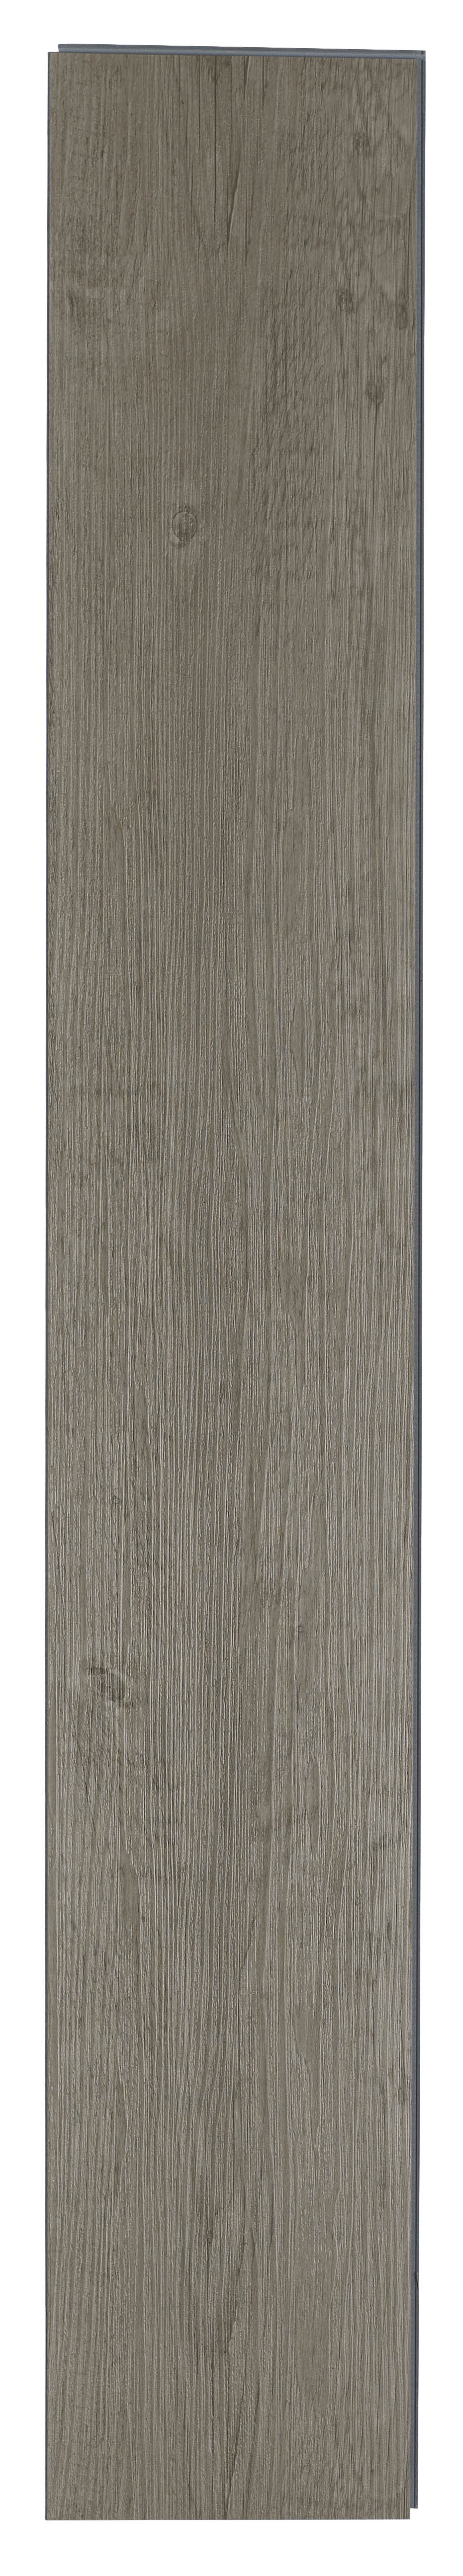 Gilpin Weathered Ash Brown SPC Flooring with Integrated Underlay - Sample